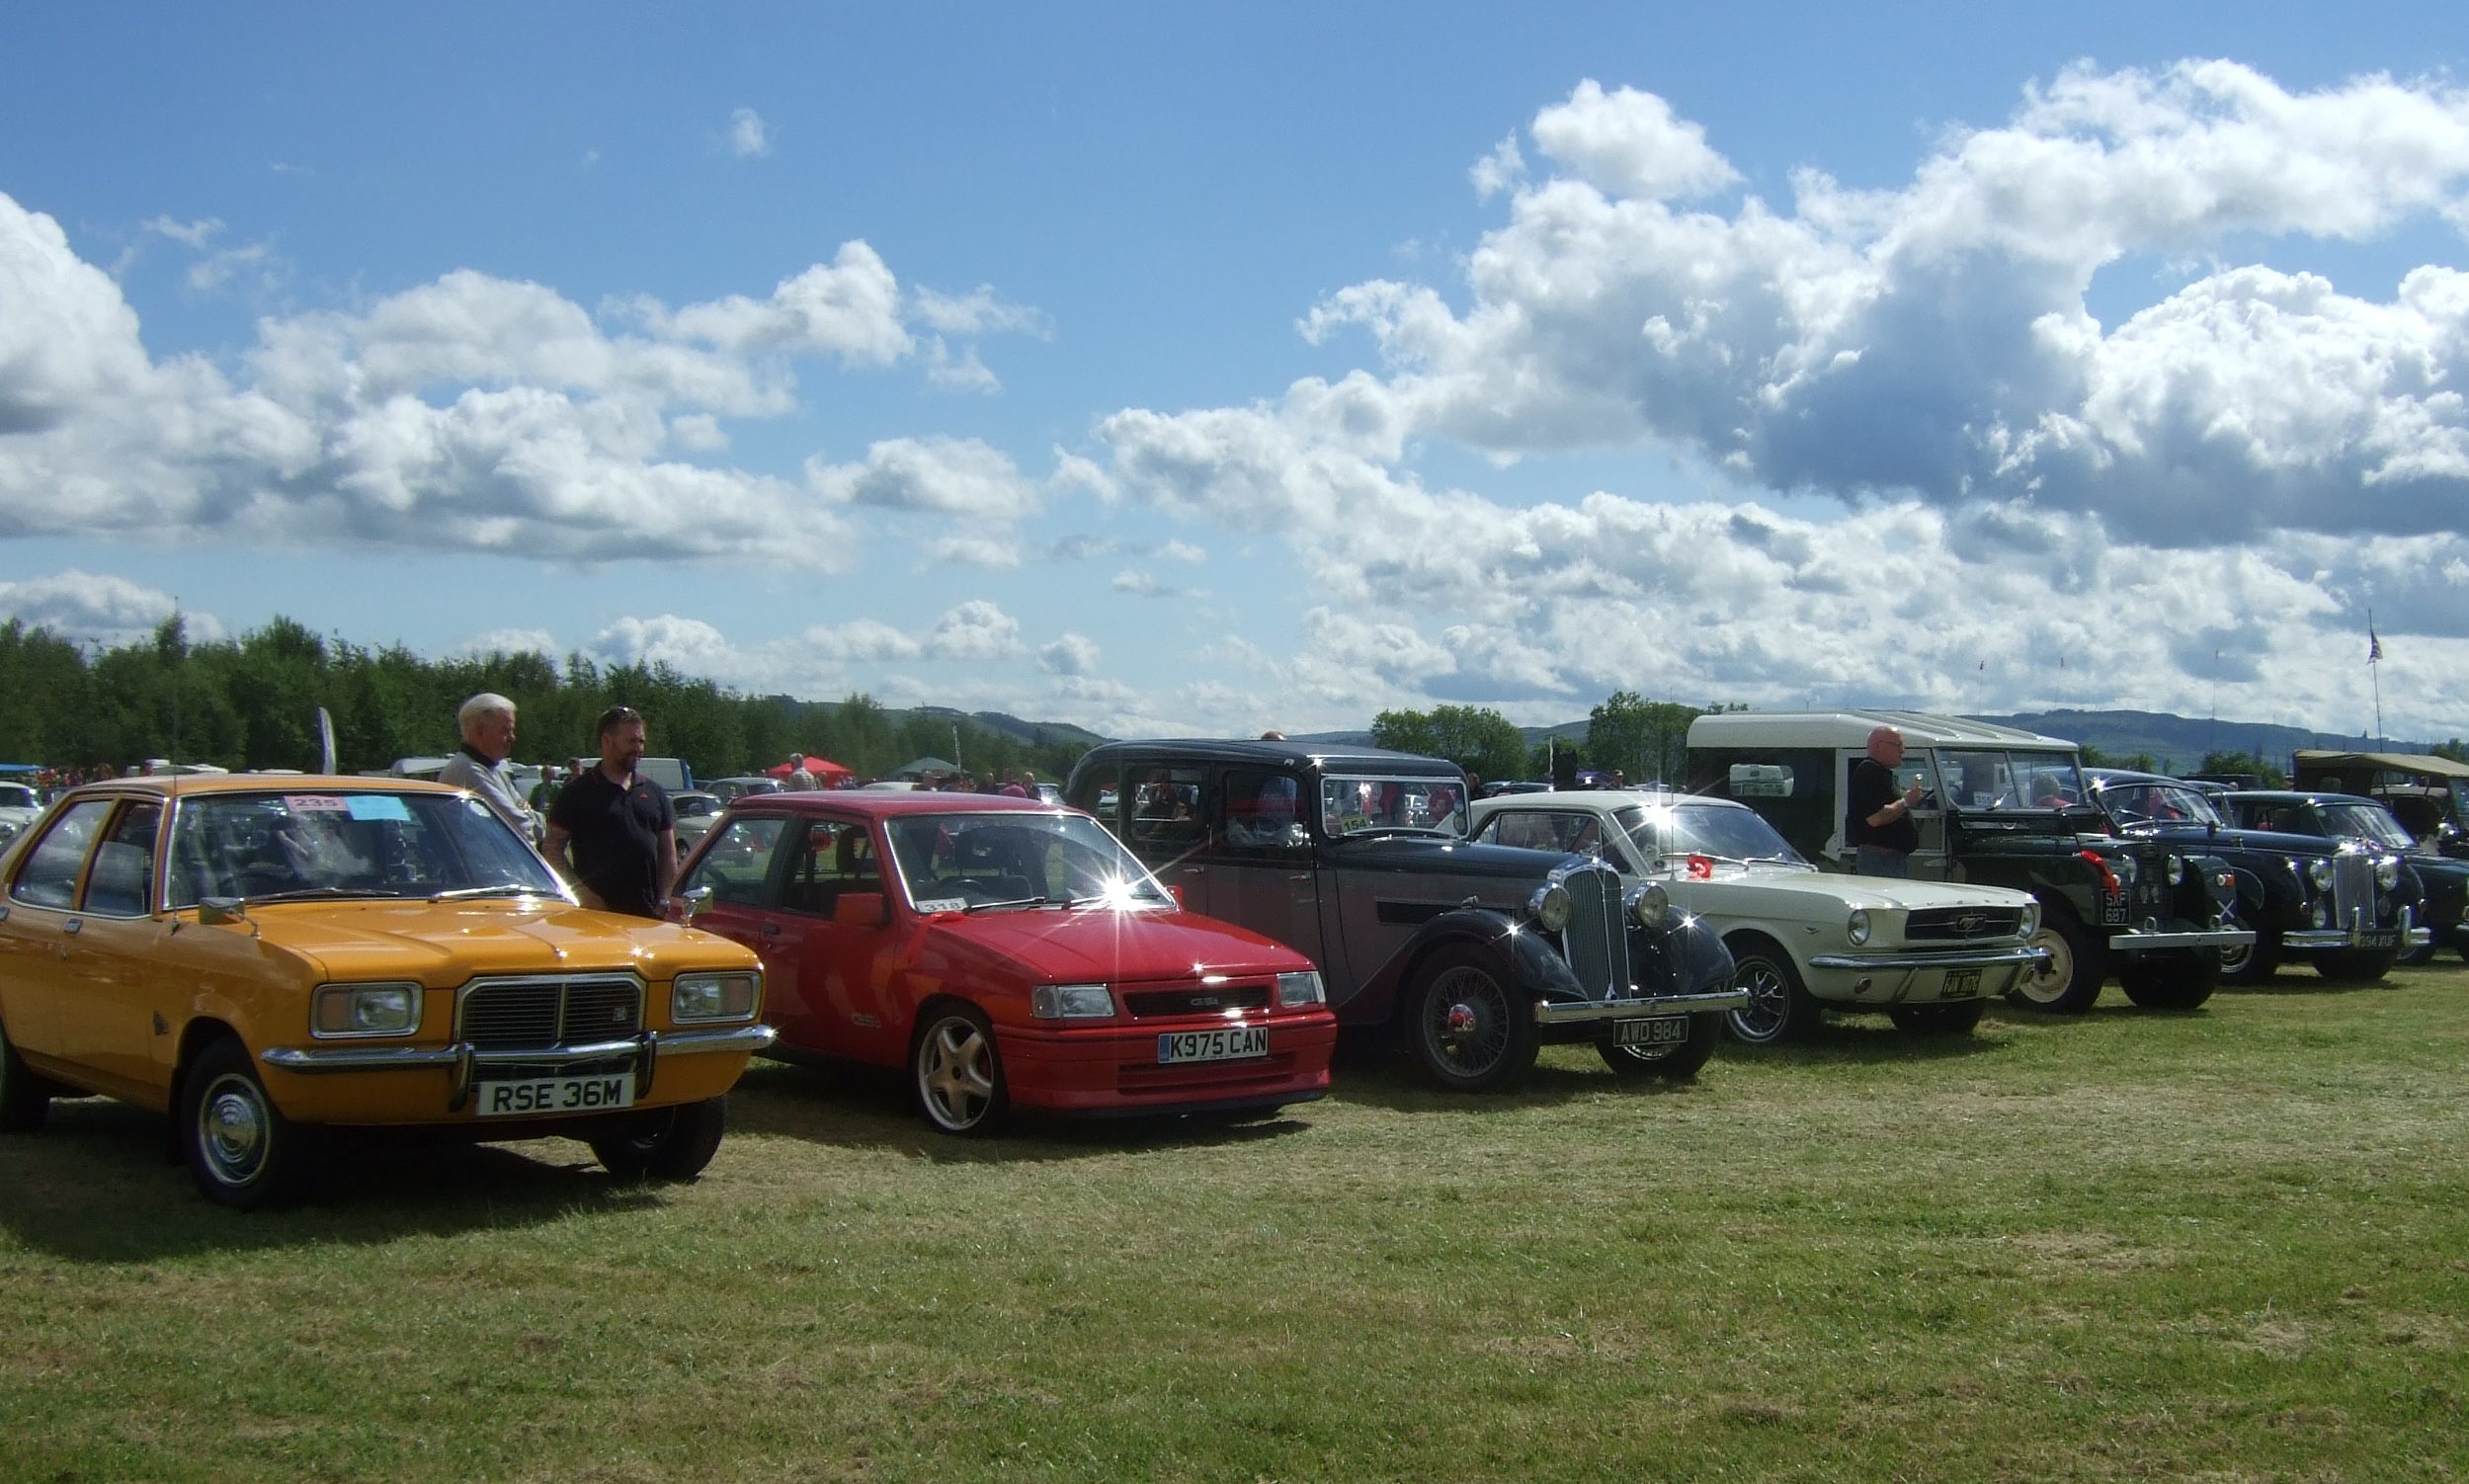 Last year's Tayside Classic Motor Show was blessed with sunshine.